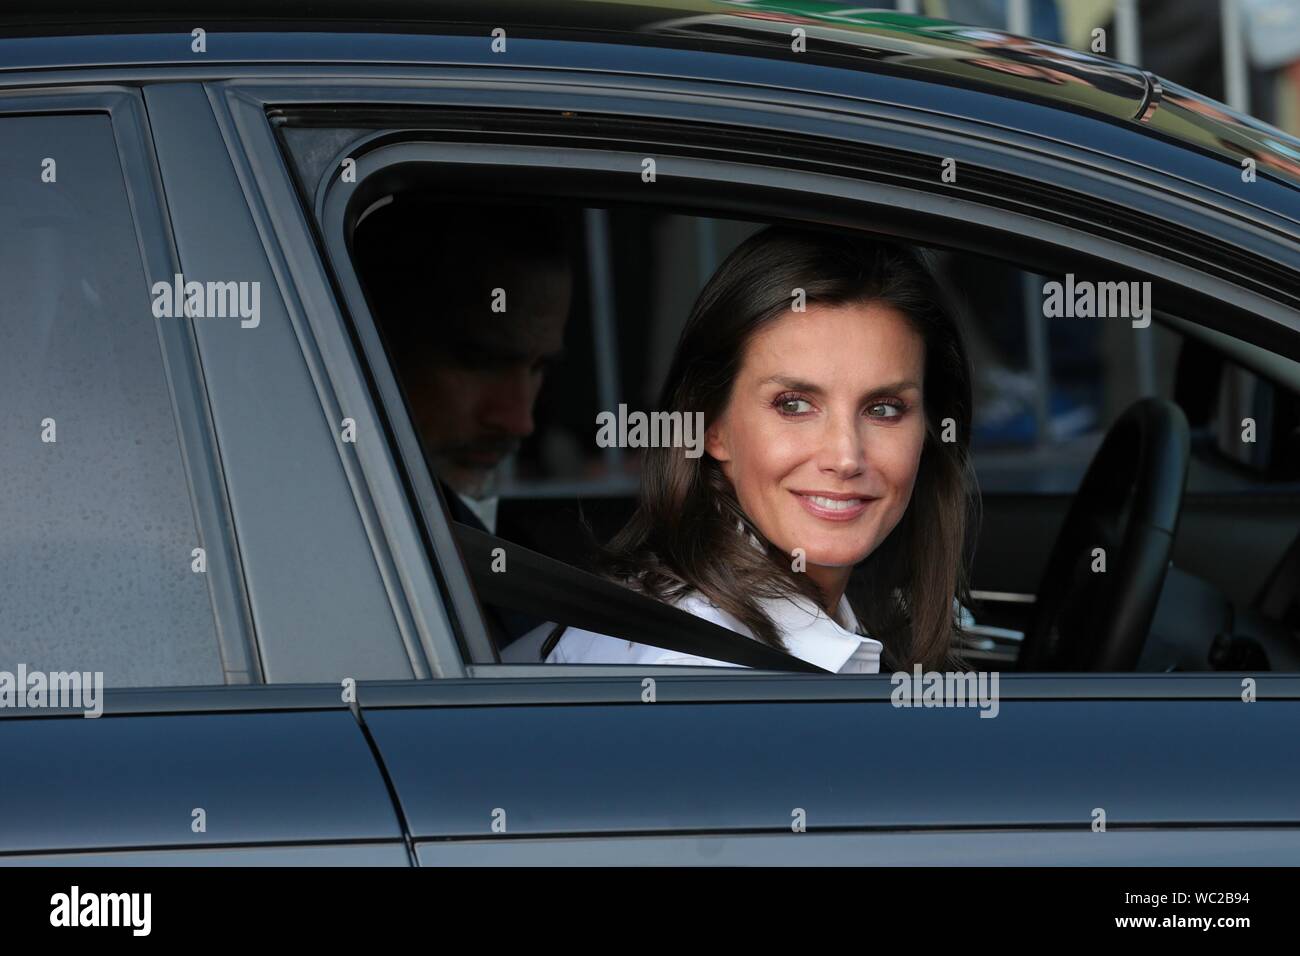 Madrid, Spain. 27th Aug, 2019. Letizia queen spain.Felipe VI and Letizia Reyes de España speak with the press accompanied by their daughters Princess Leonor and the Infanta Sofia in the hospital after visiting King Juan Carlos I, who is recovering from an open heart operation. Credit: dpa picture alliance/Alamy Live News Stock Photo